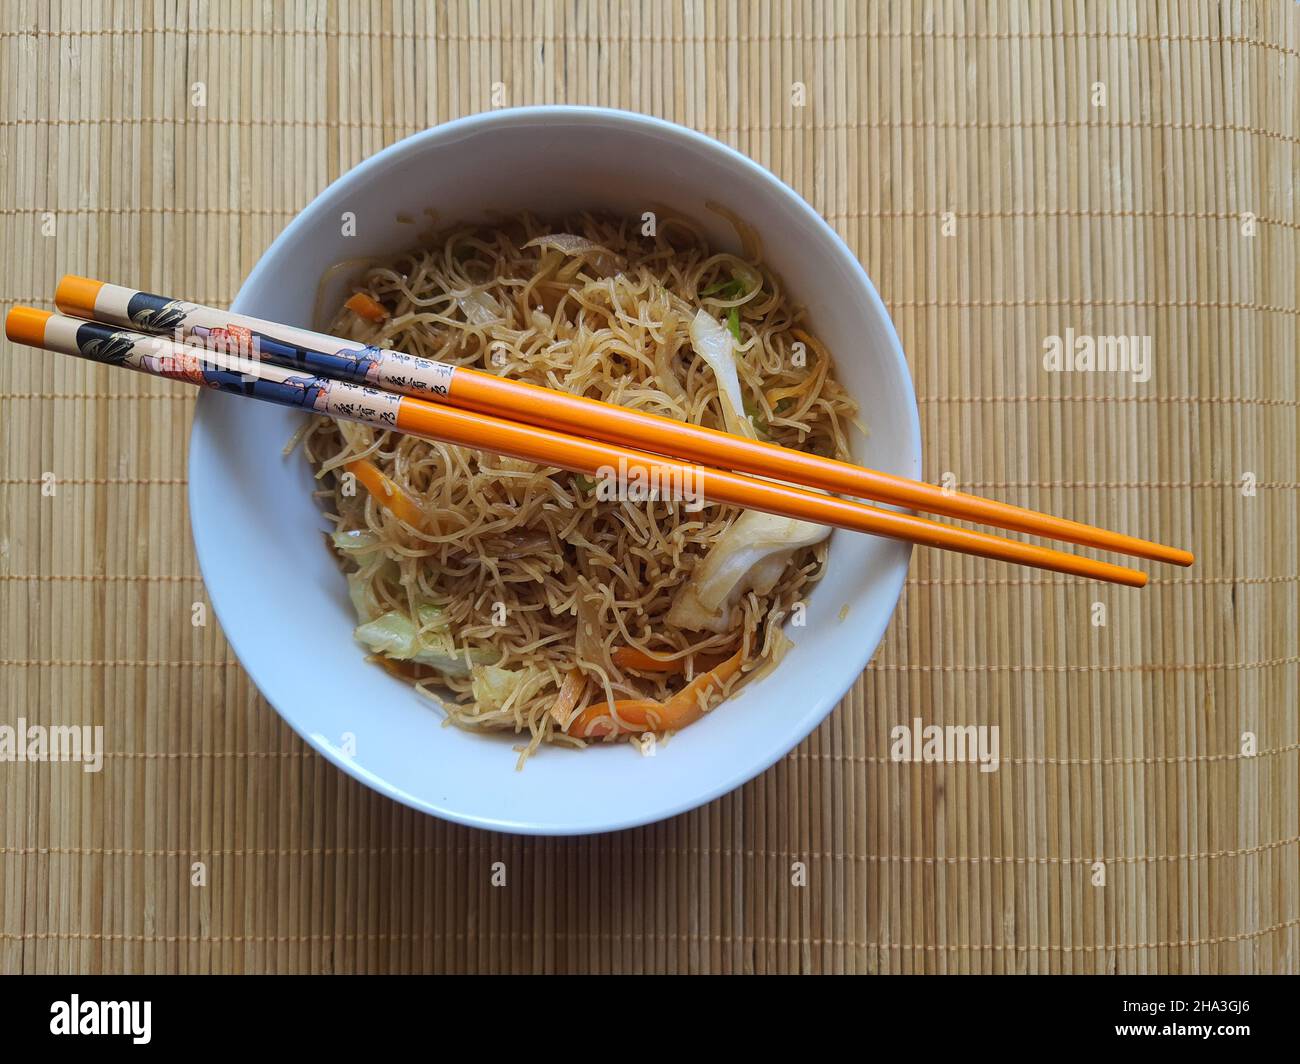 Bifum vegetable noodles in a white crockery bowl with two chopsticks on a bamboo placemat. View from above. Stock Photo